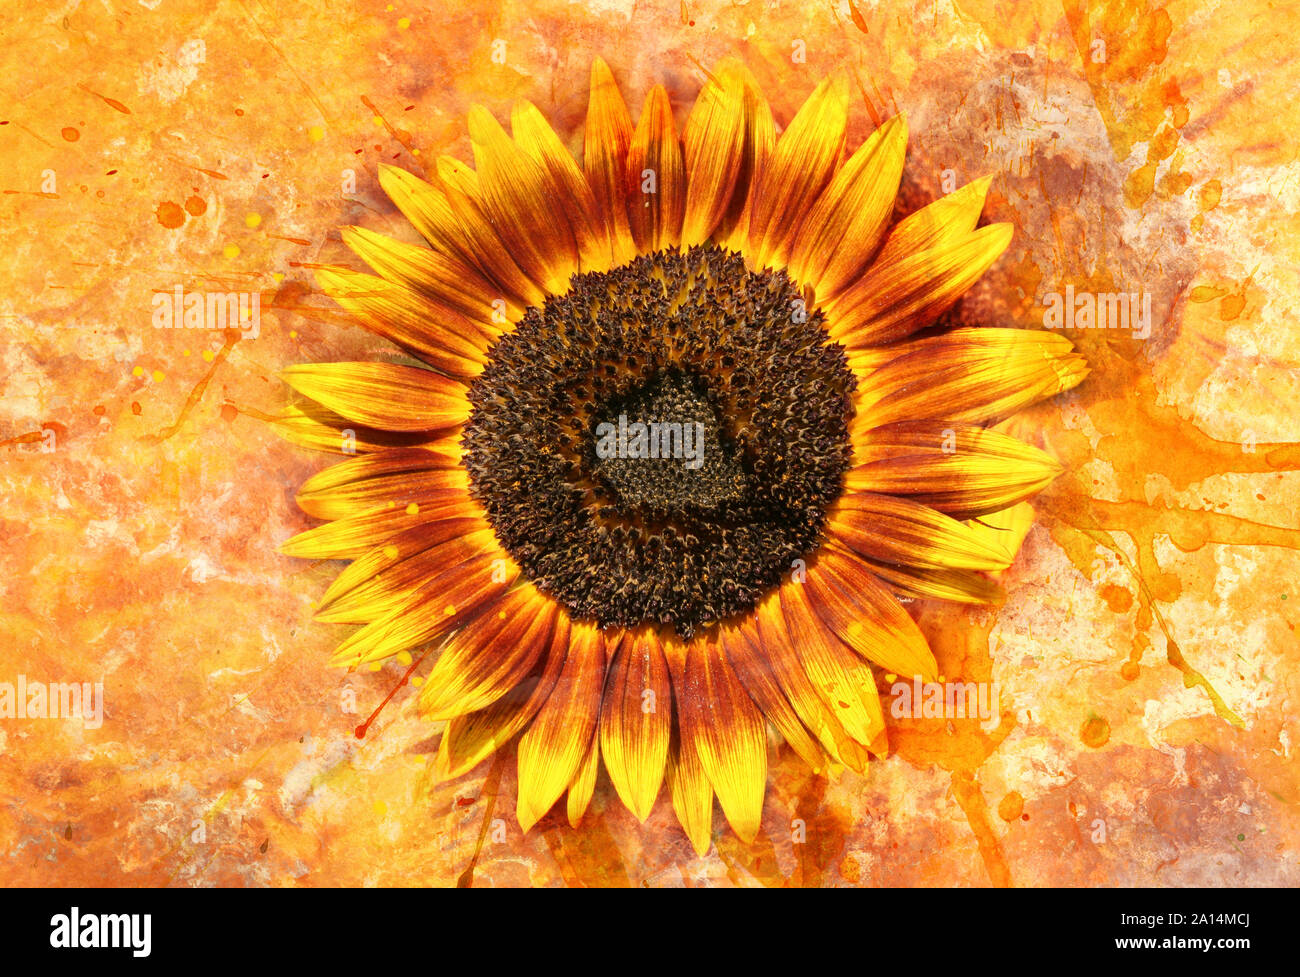 Gorgeous flower background illustration with paint spatter and vintage grunge texture design, warm yellow orange autumn colors, gerbera daisy plant Stock Photo